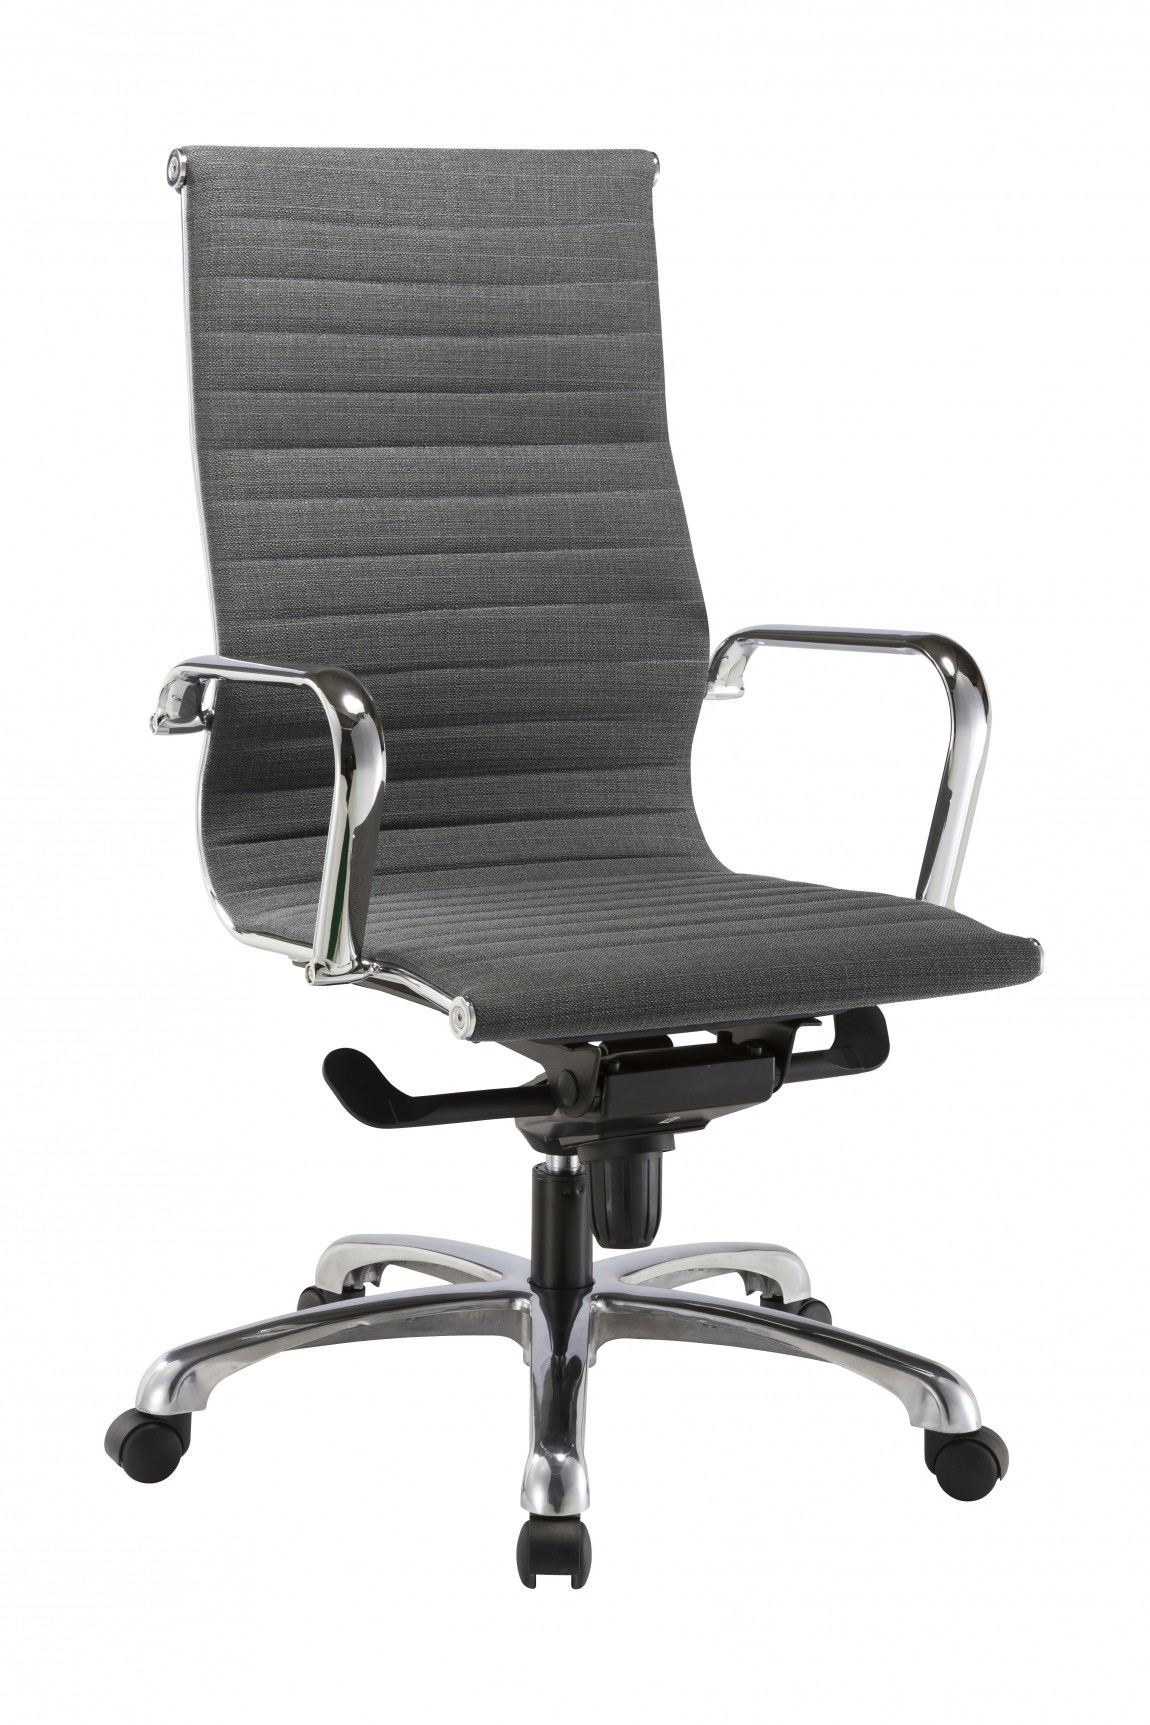 Modern Gray Mid Back Conference Room Chair with Arms : Harmony Collection